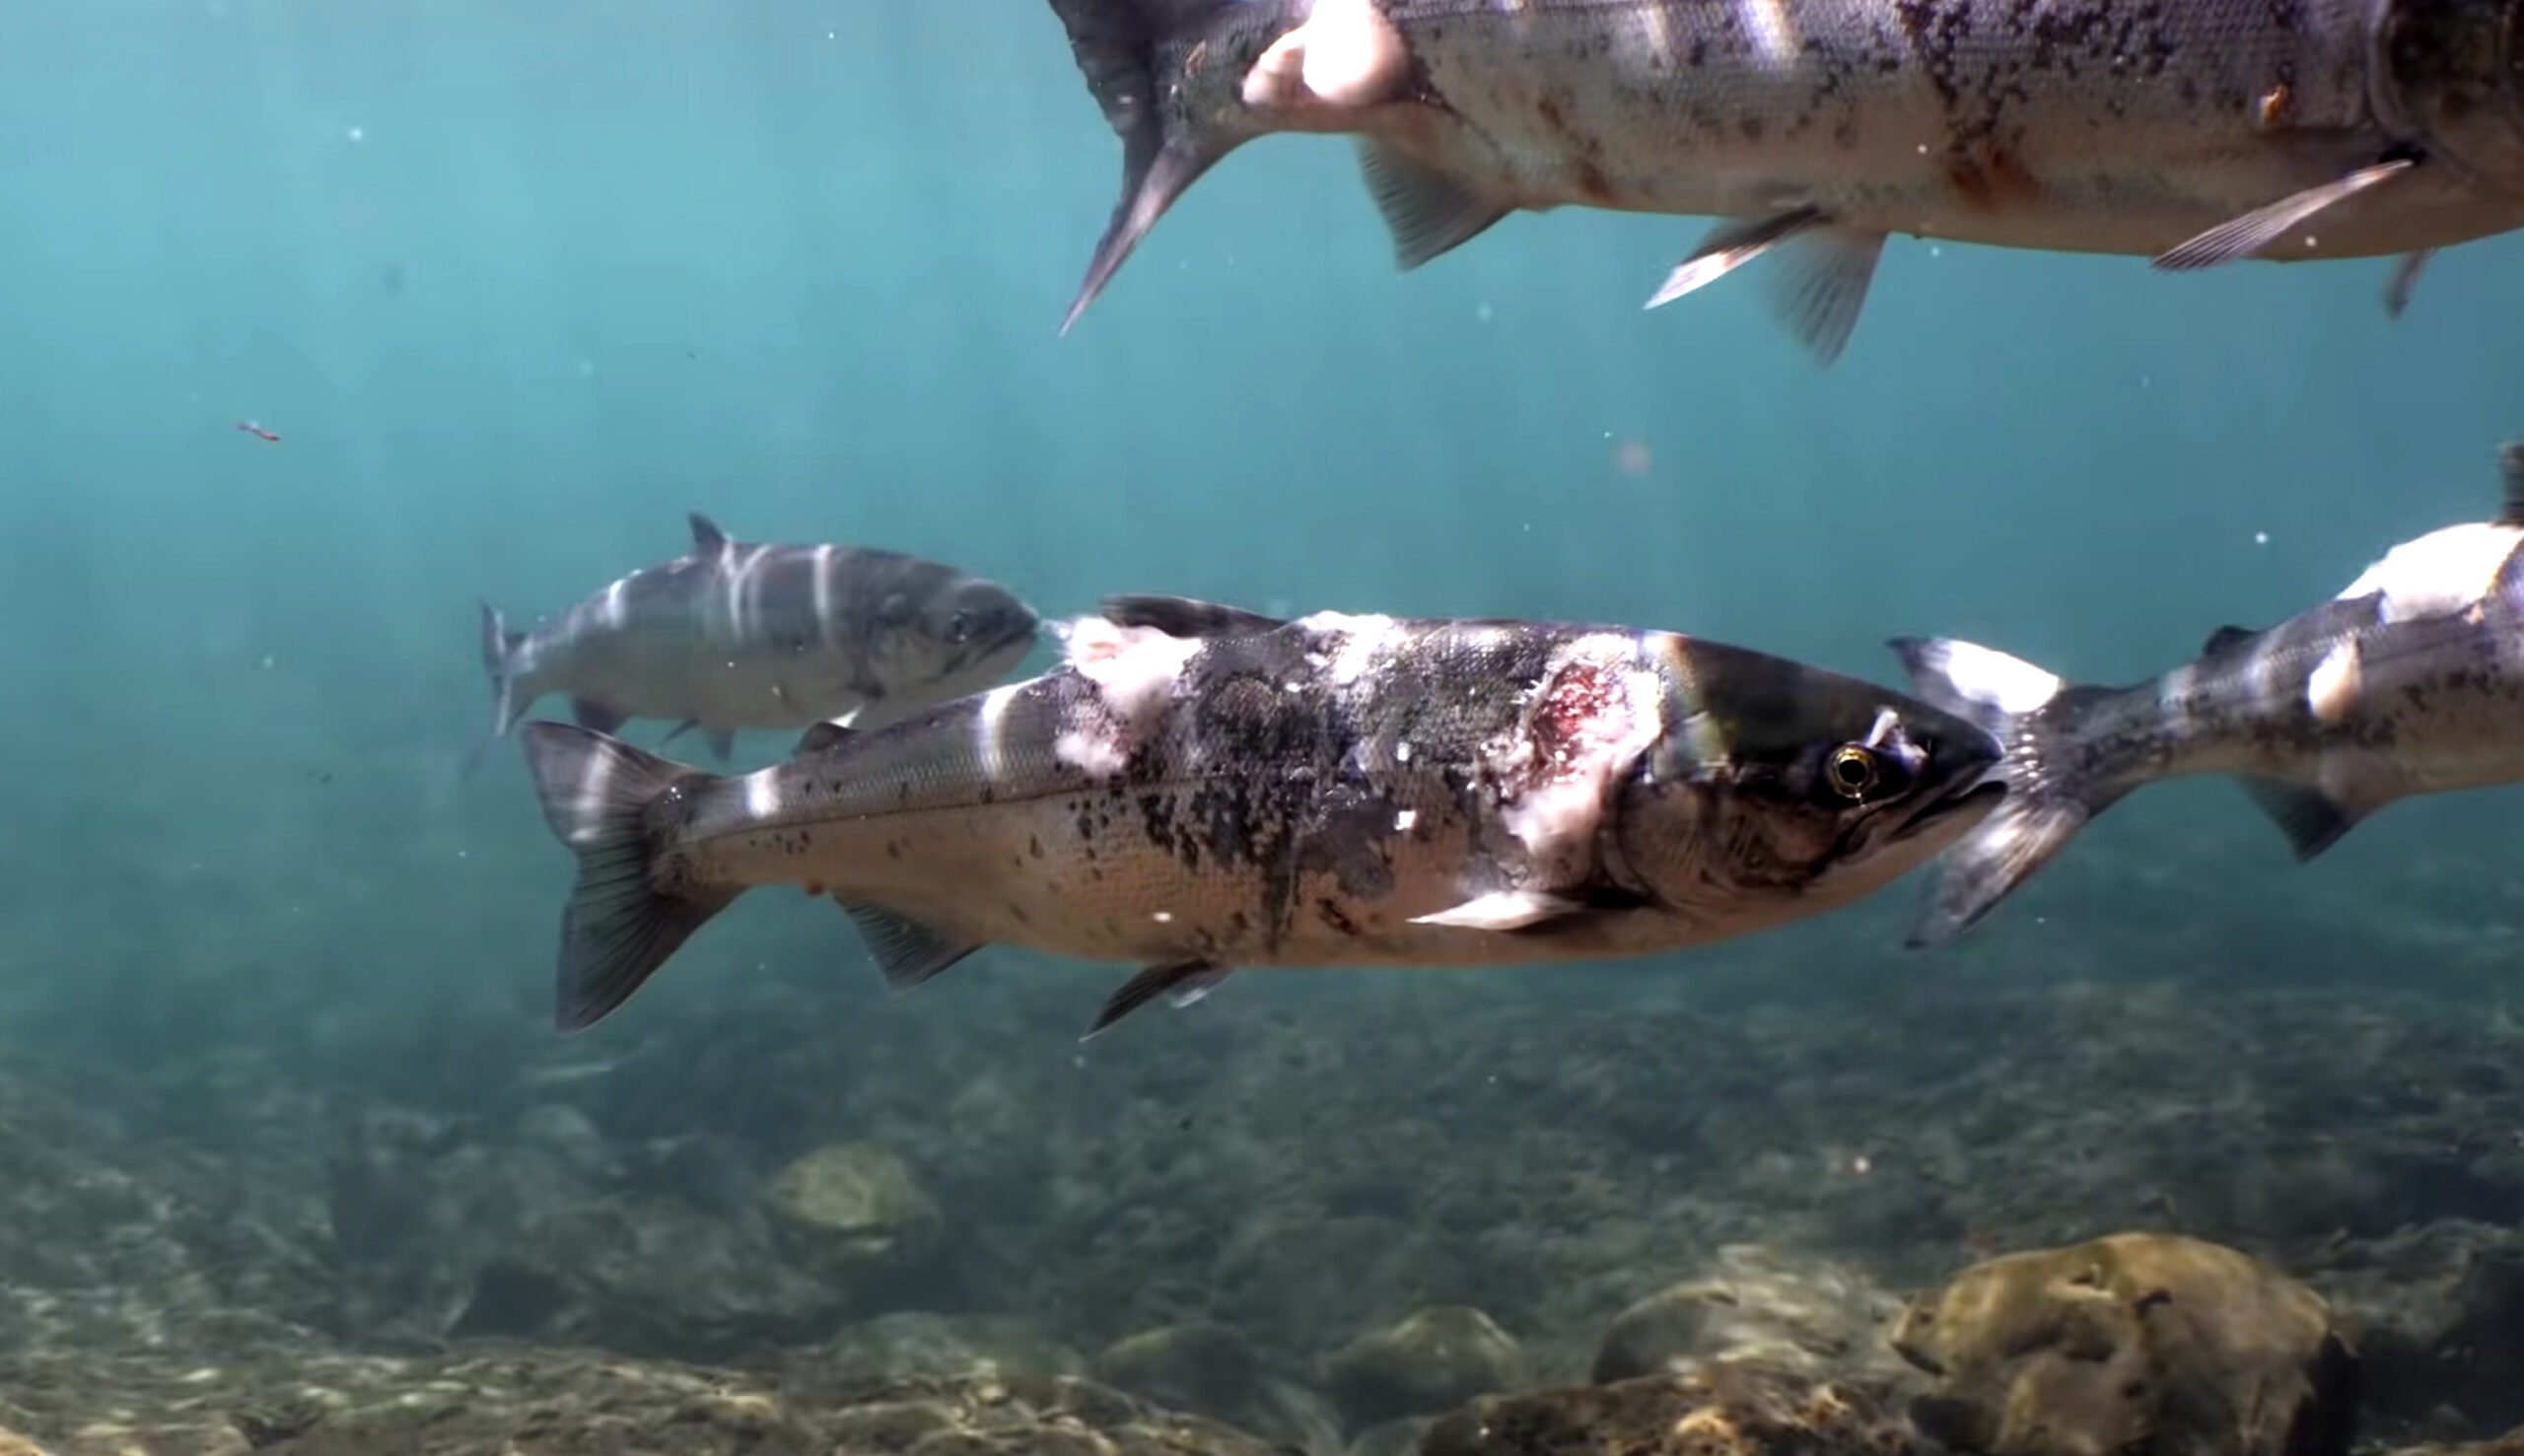 Columbia River salmon are stressed by heat, causing lesions and fungus.